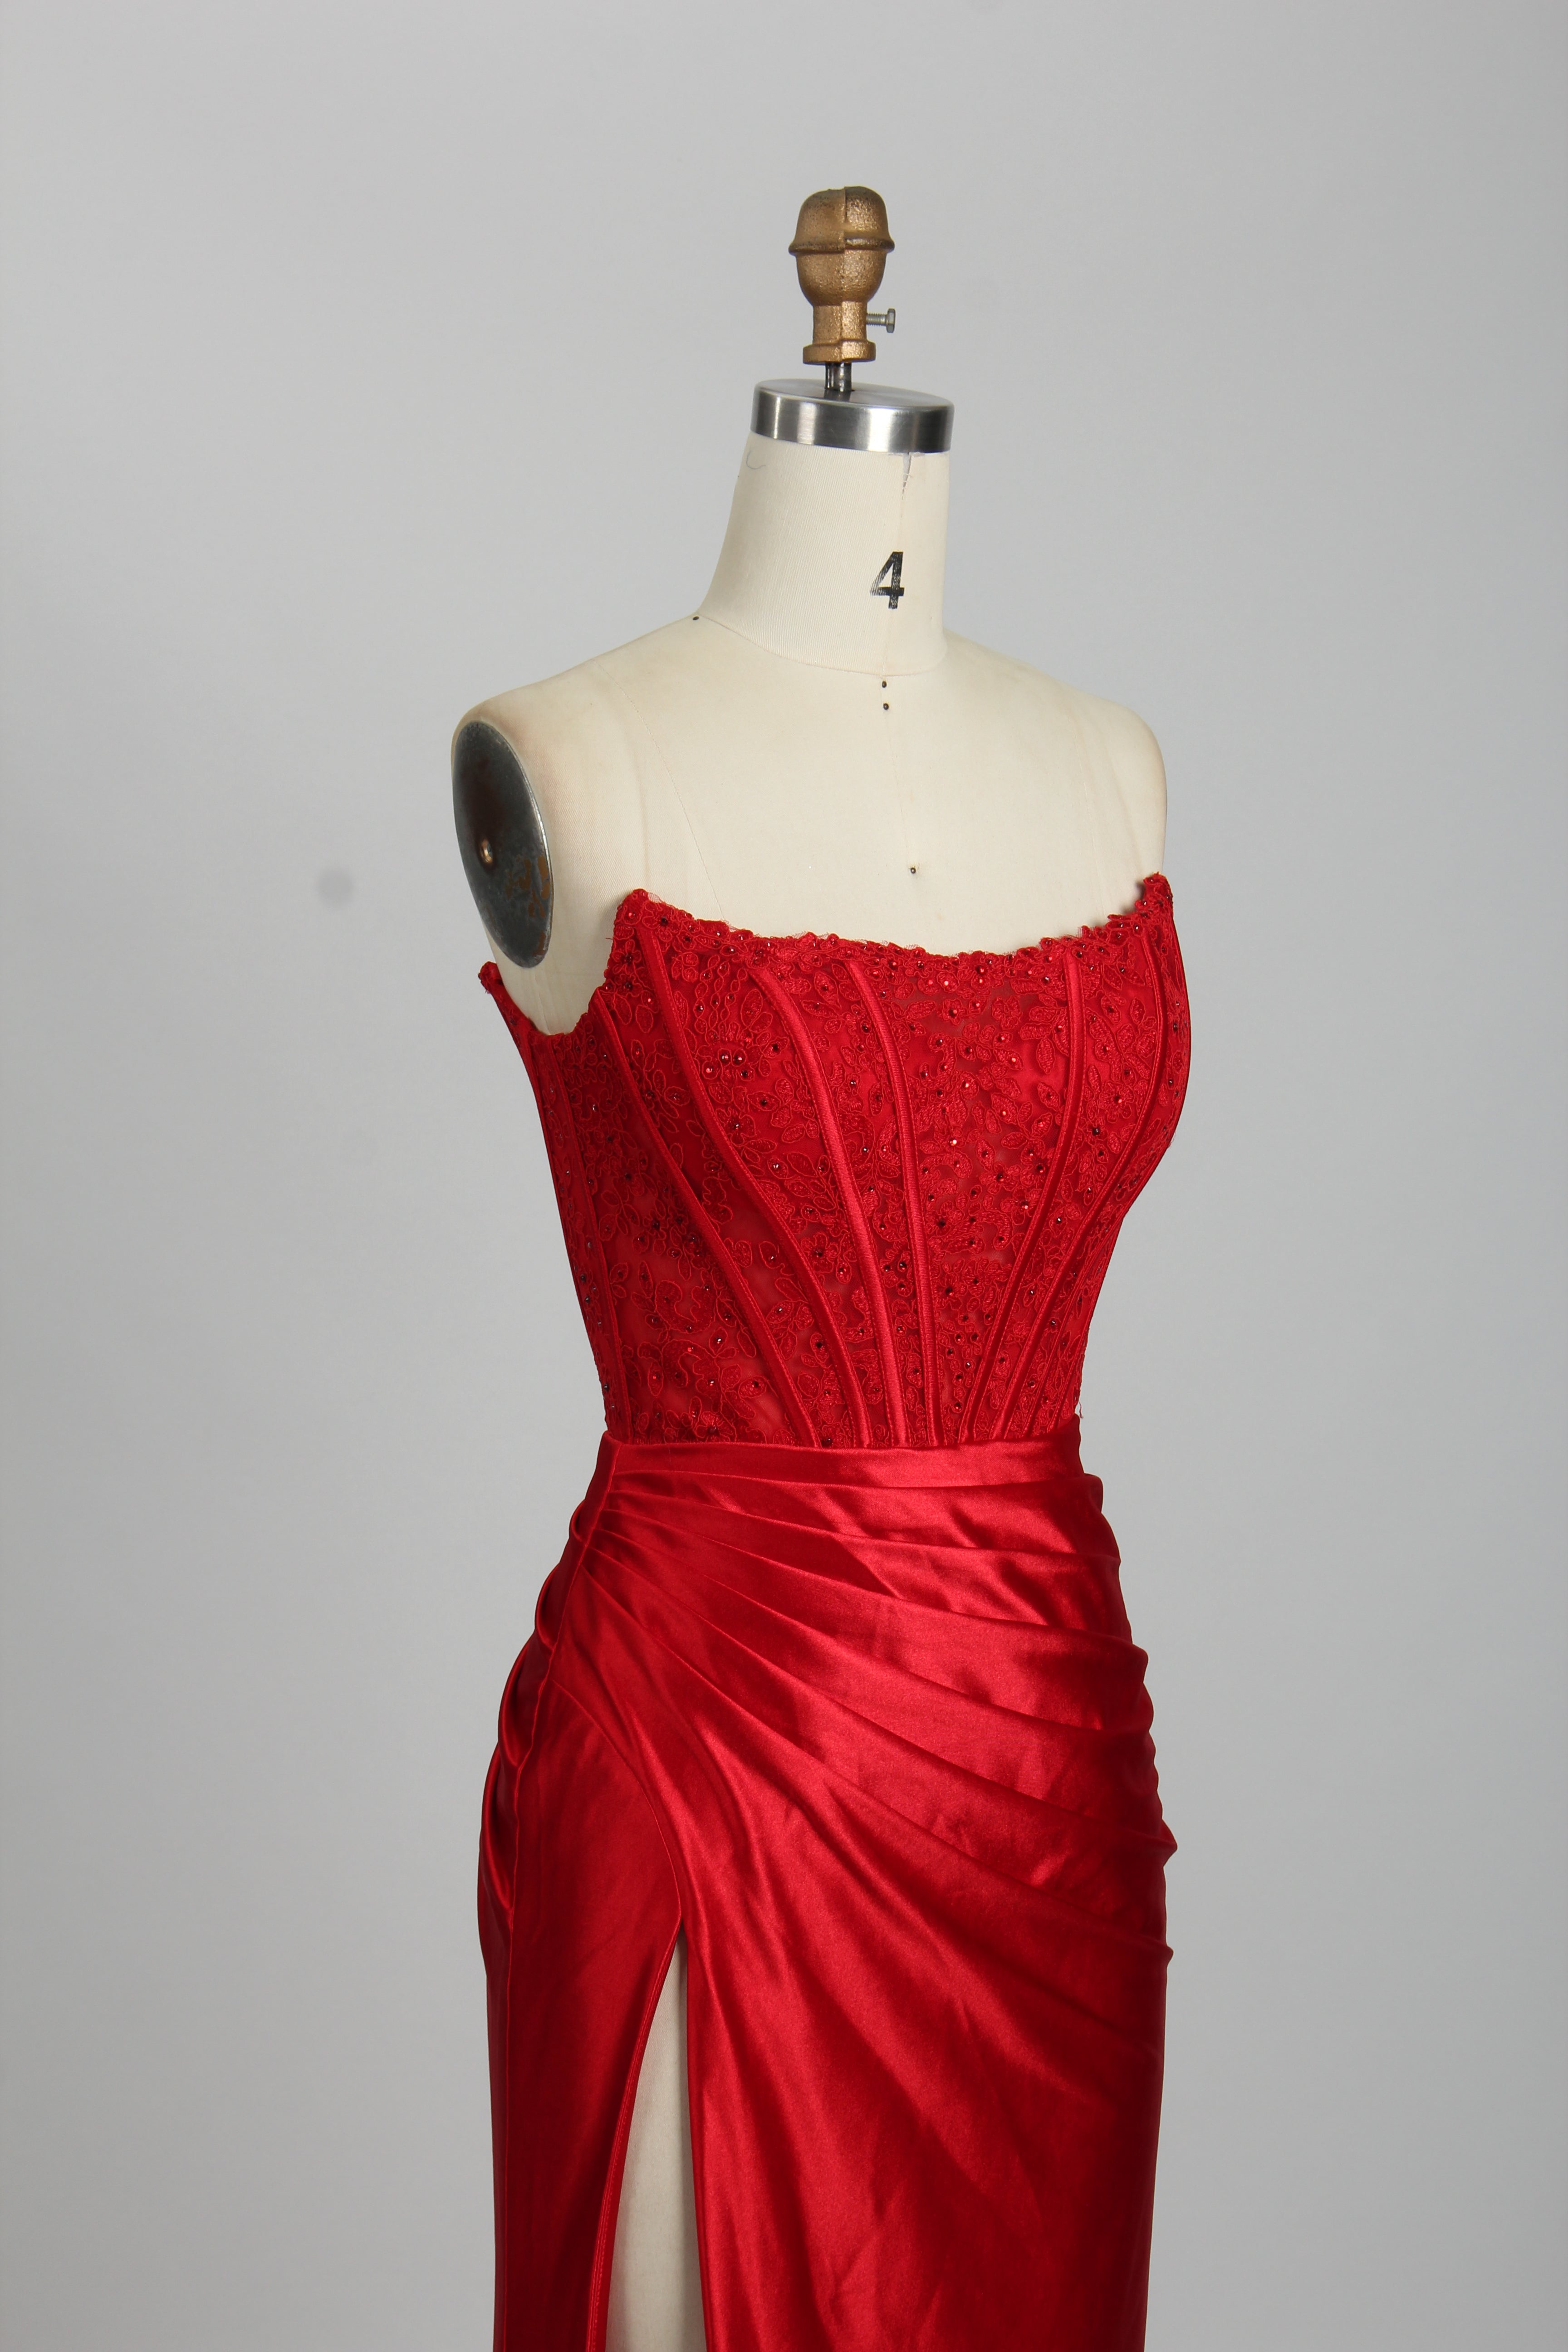 Honey Couture AUGUST Red Strapless Embellished Bustier Satin Mermaid Formal Dress